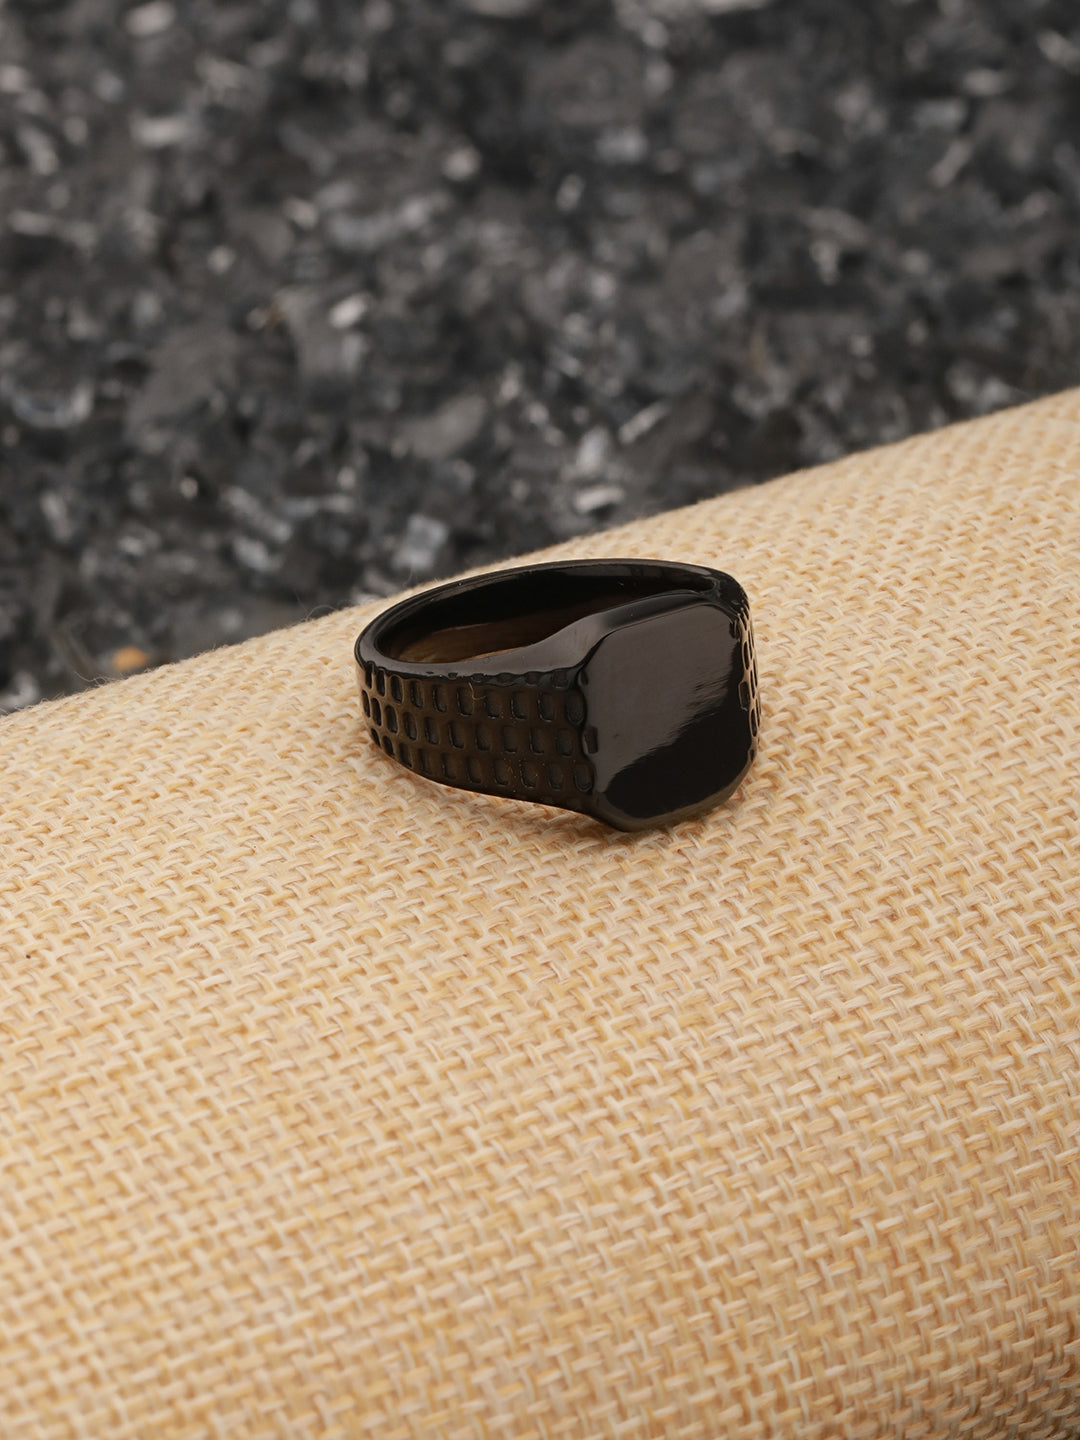 Jazz And Sizzle Men Black Bold & Textured Stainless Steel Band Finger Ring - Jazzandsizzle